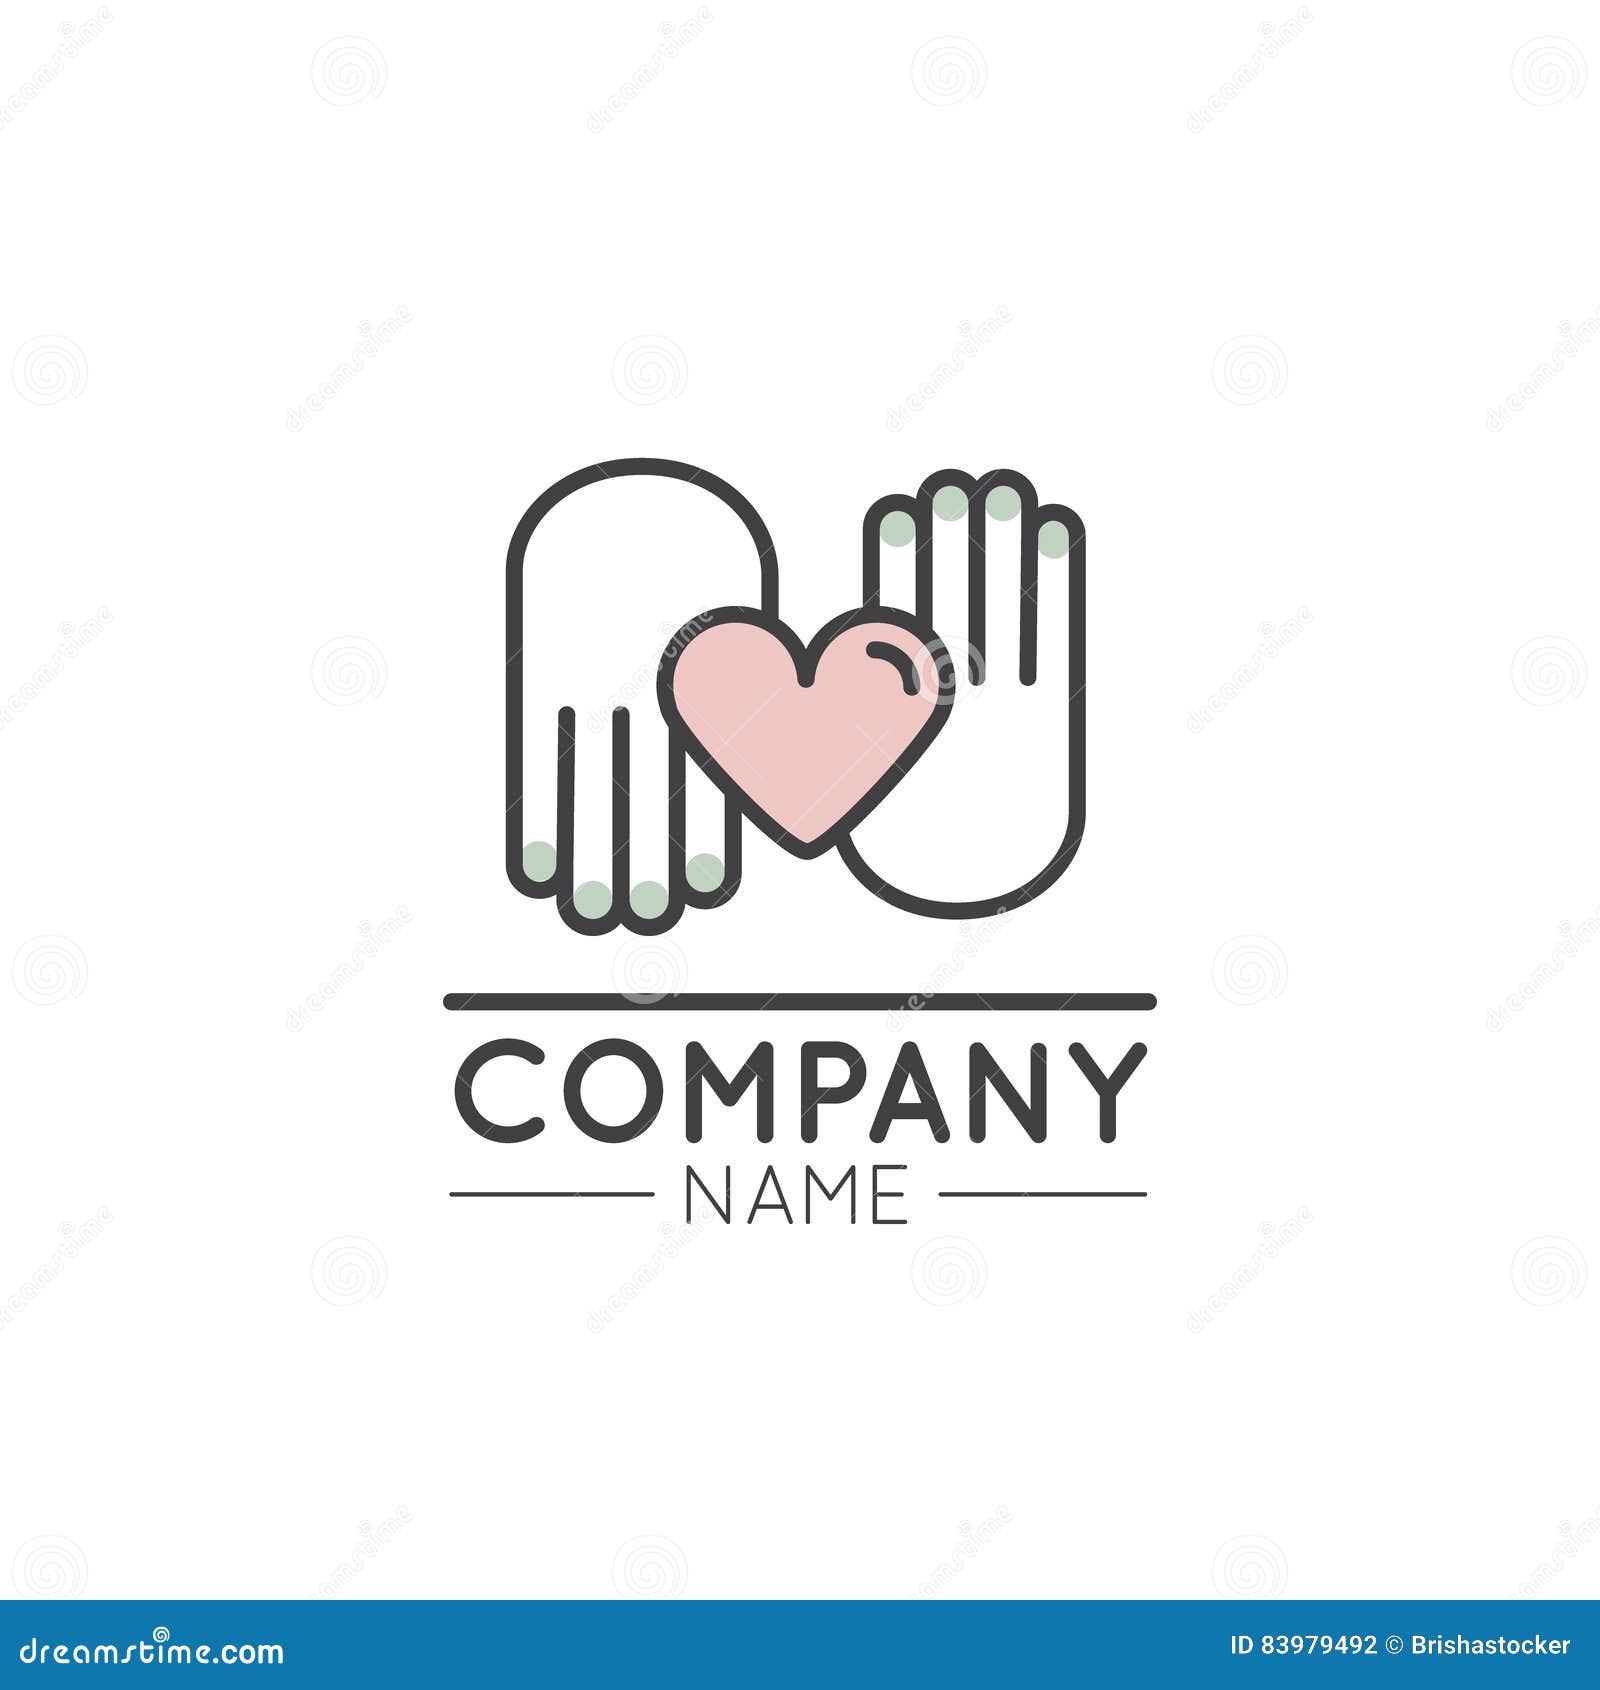 logo for nonprofit organizations and donation centre